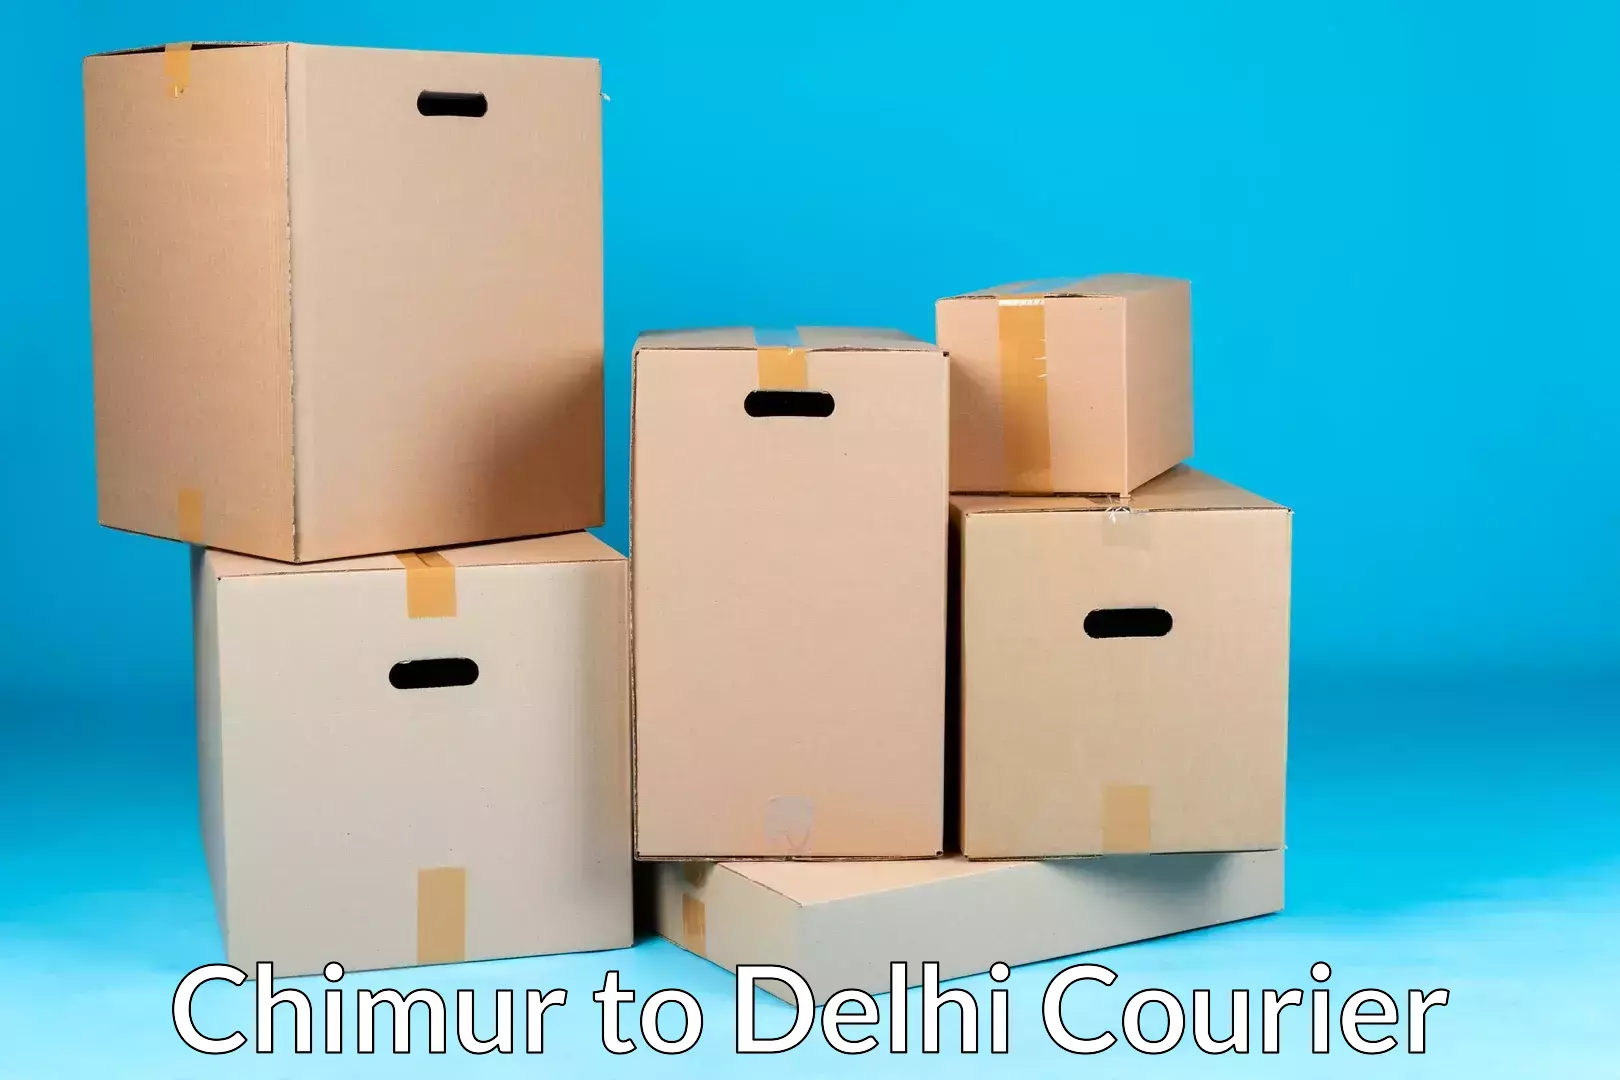 Quality relocation assistance Chimur to Lodhi Road